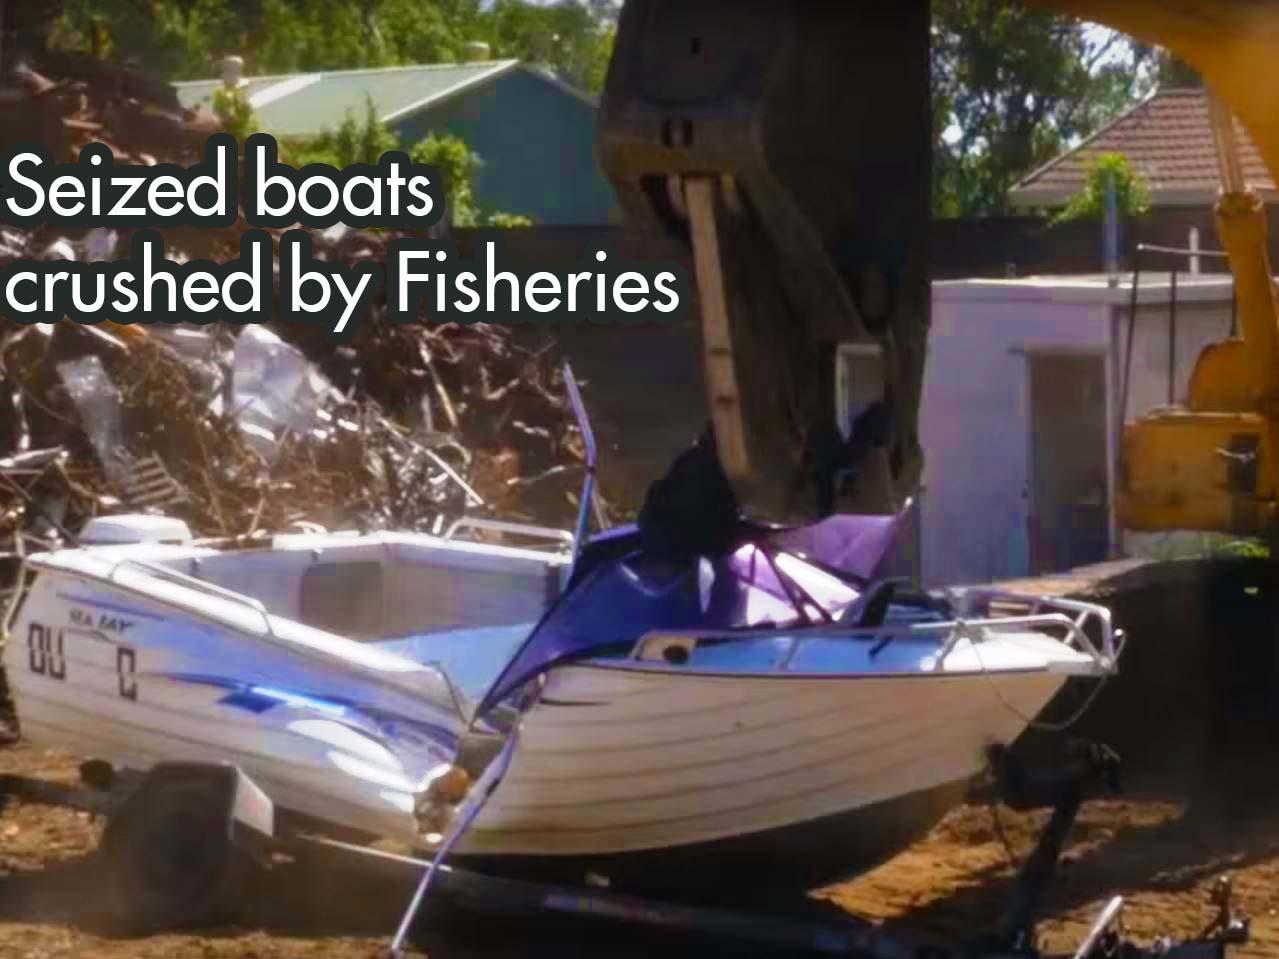 Seized boat crushed by Queensland Fisheries.